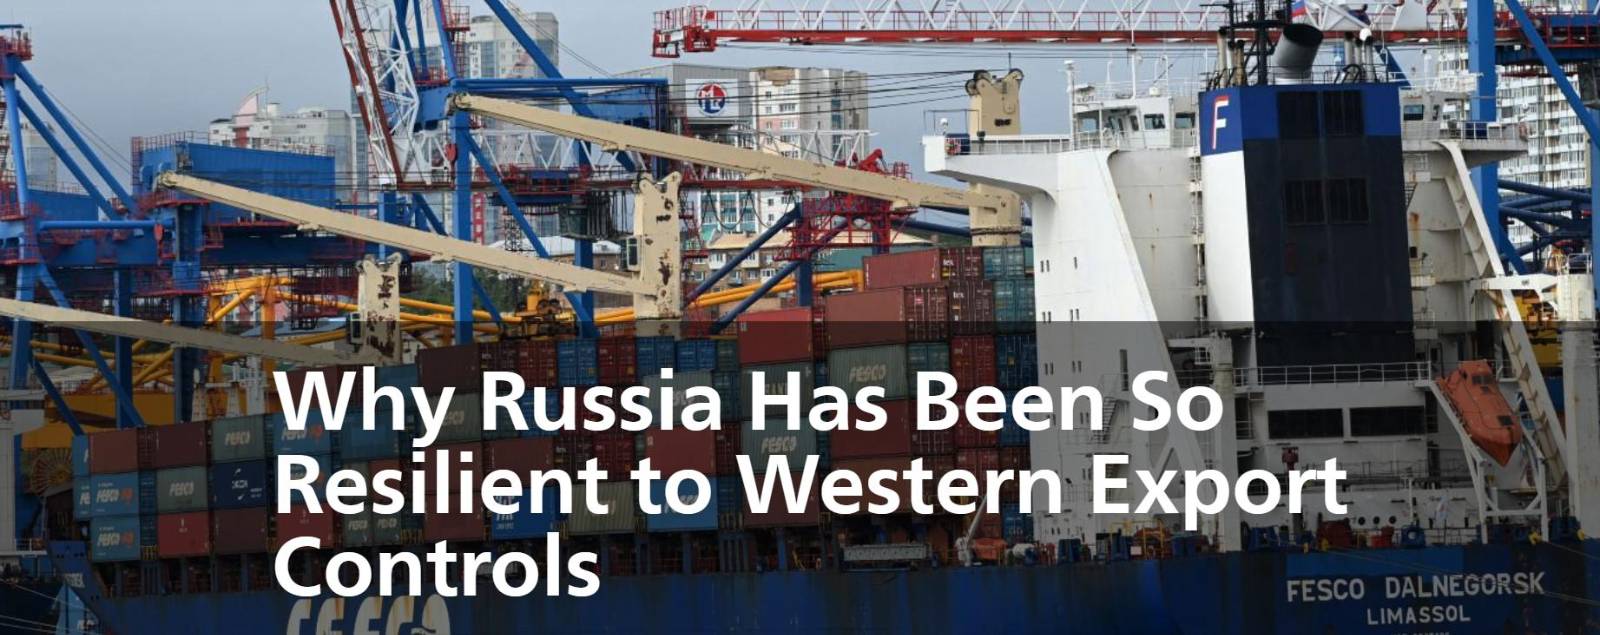 Why Russia Has Been So Resilient to Western Export Controls